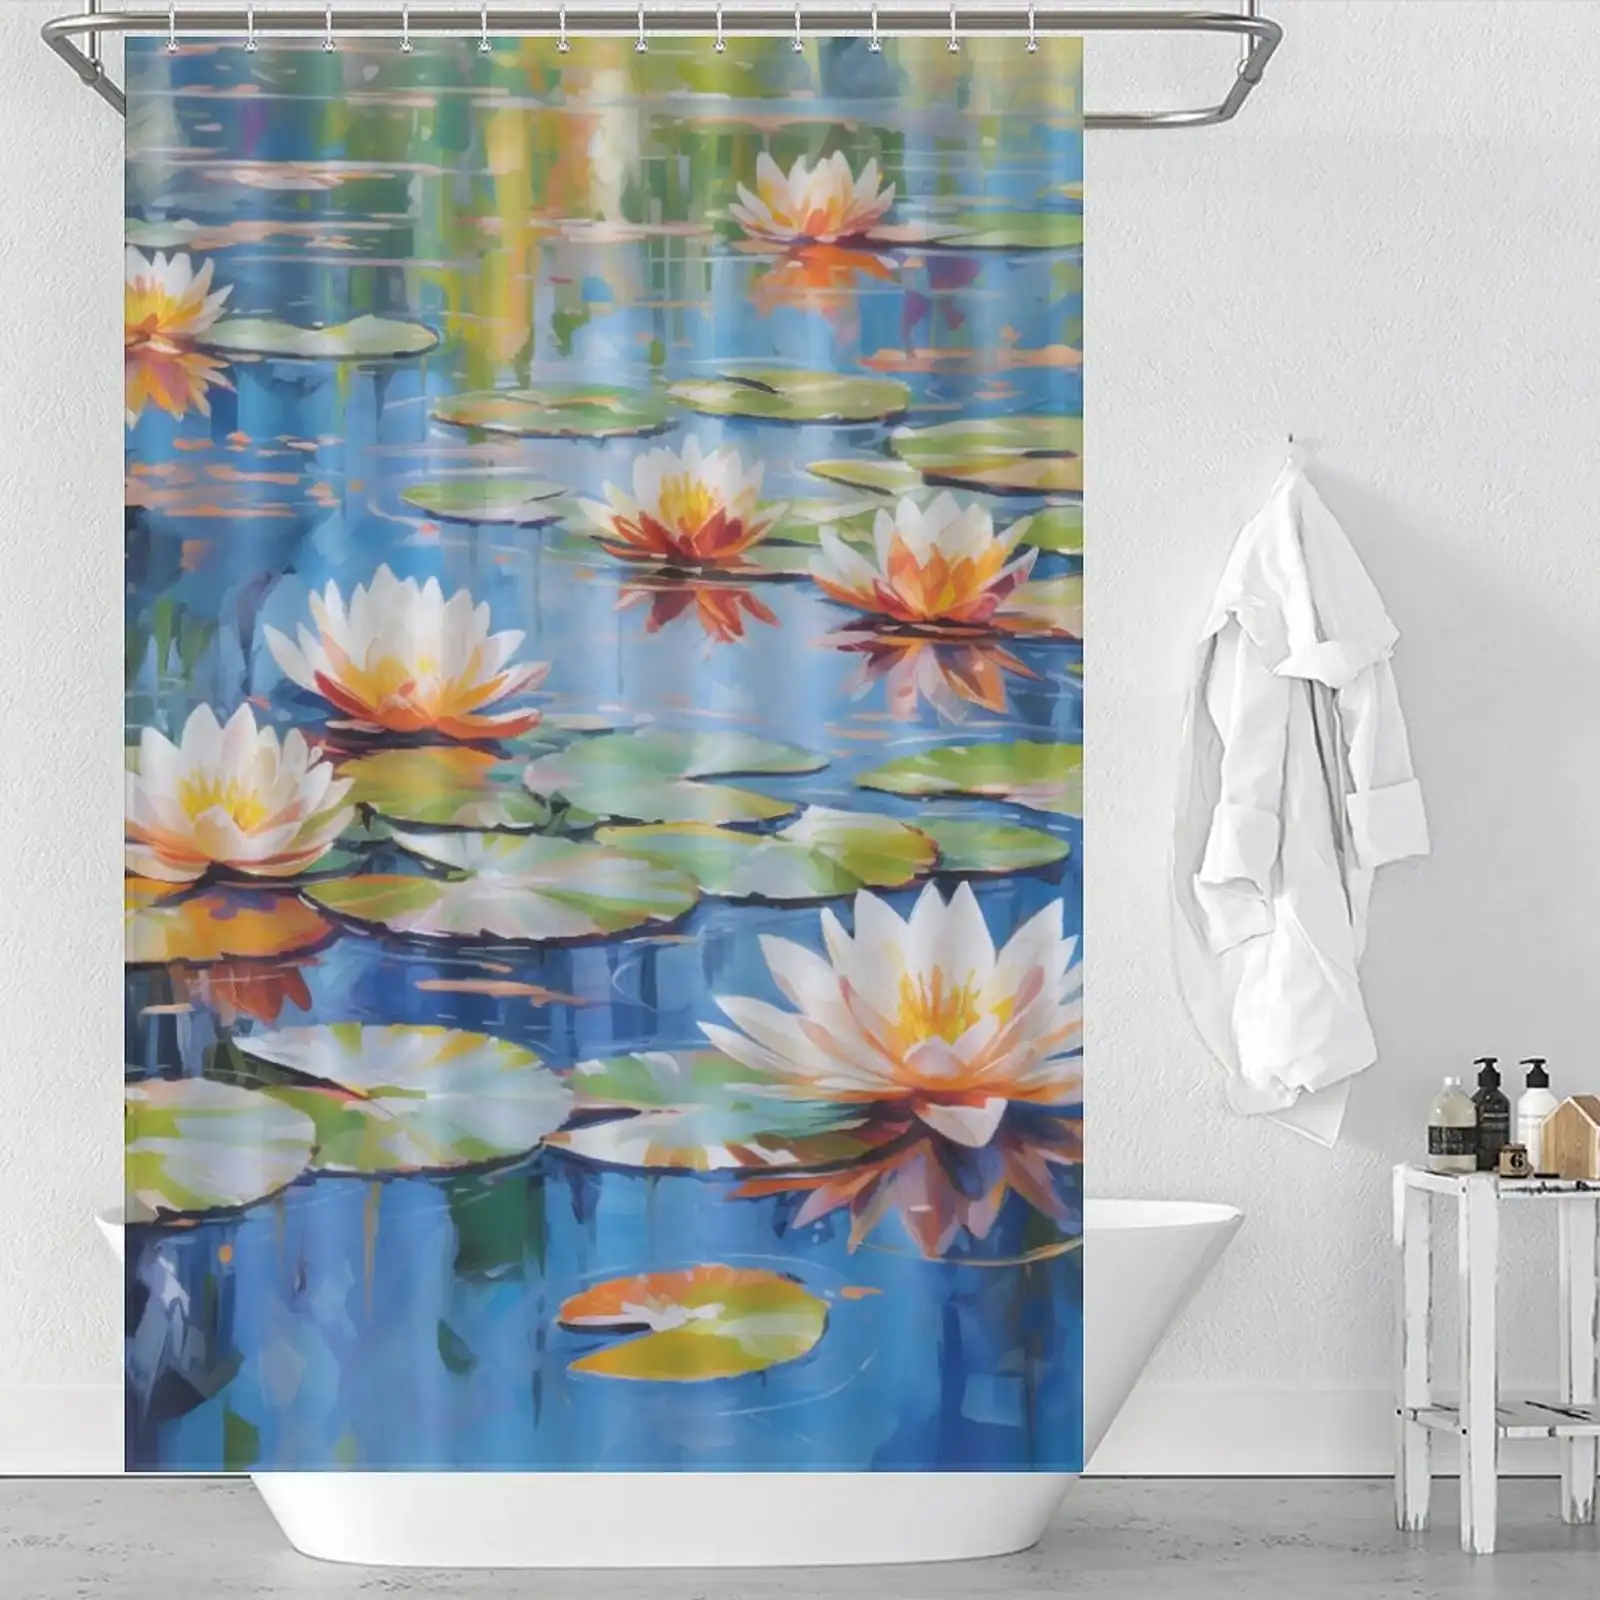 Unique Shower Curtains for Small Bathrooms: Water lilies shower curtain.